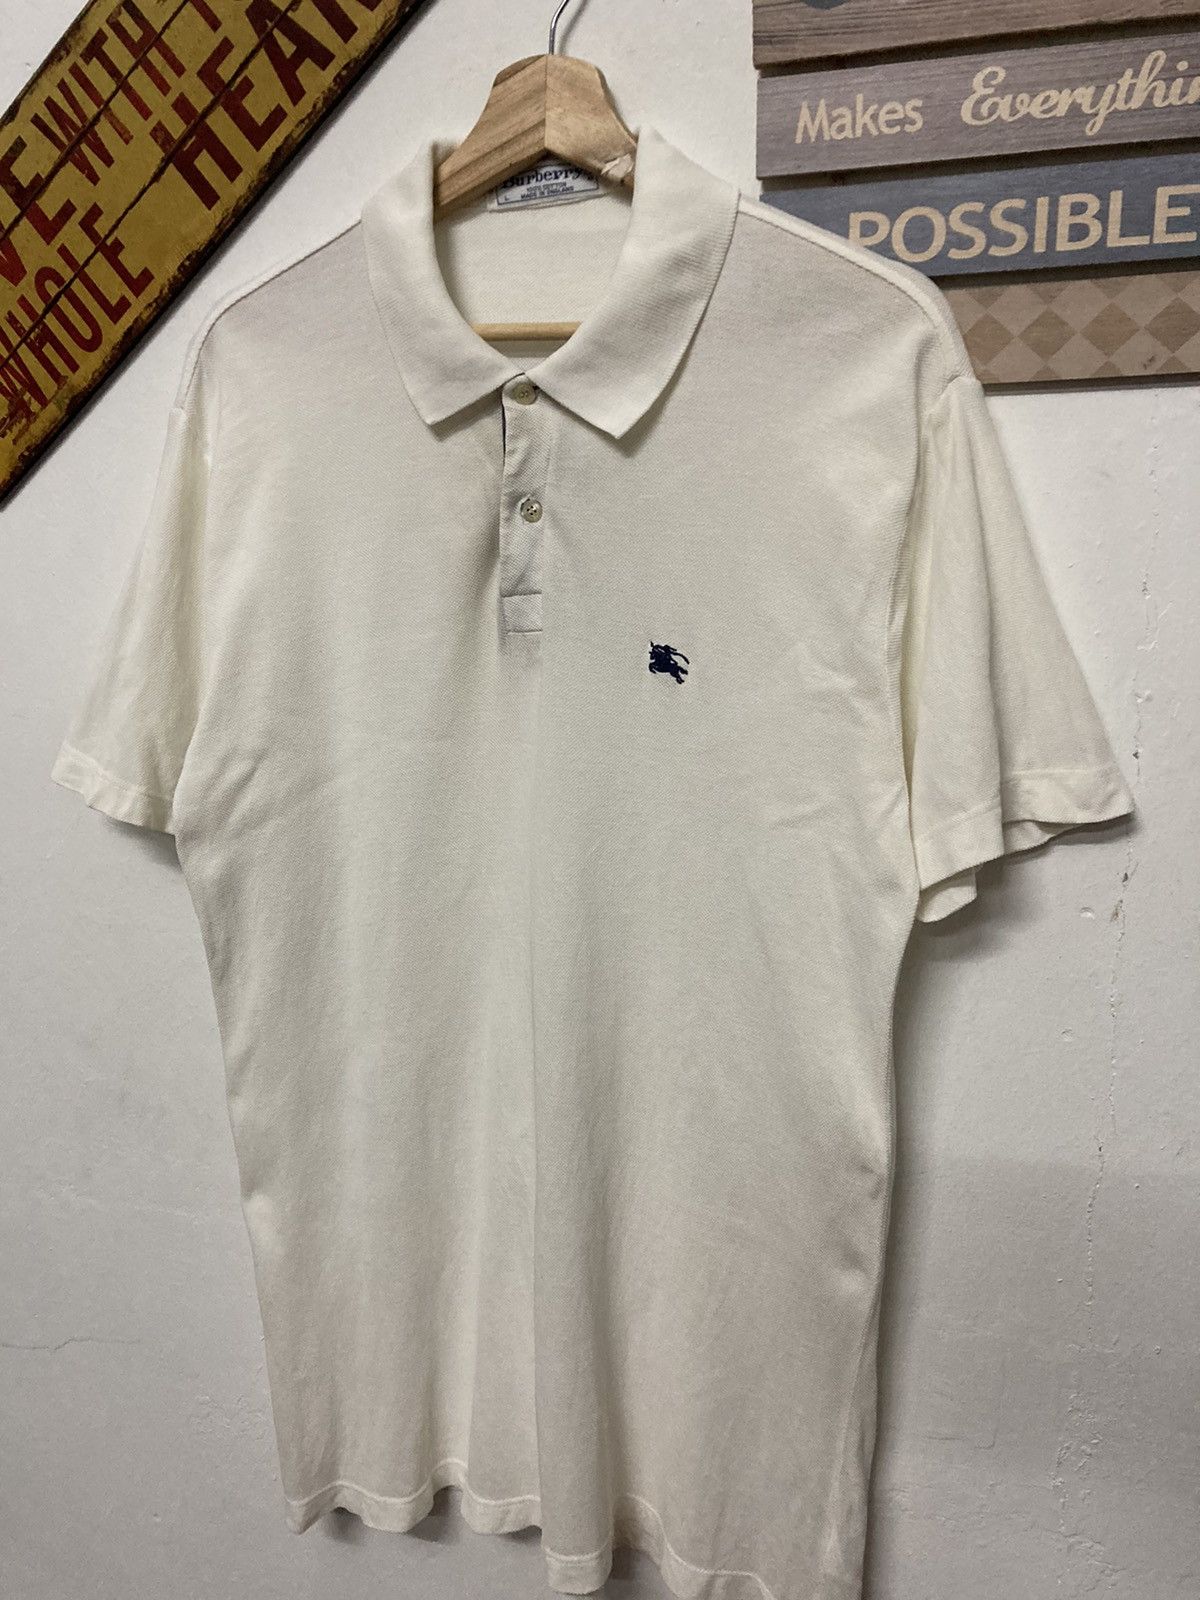 Vintage Burberrys Polo Shirt Made in England - 4